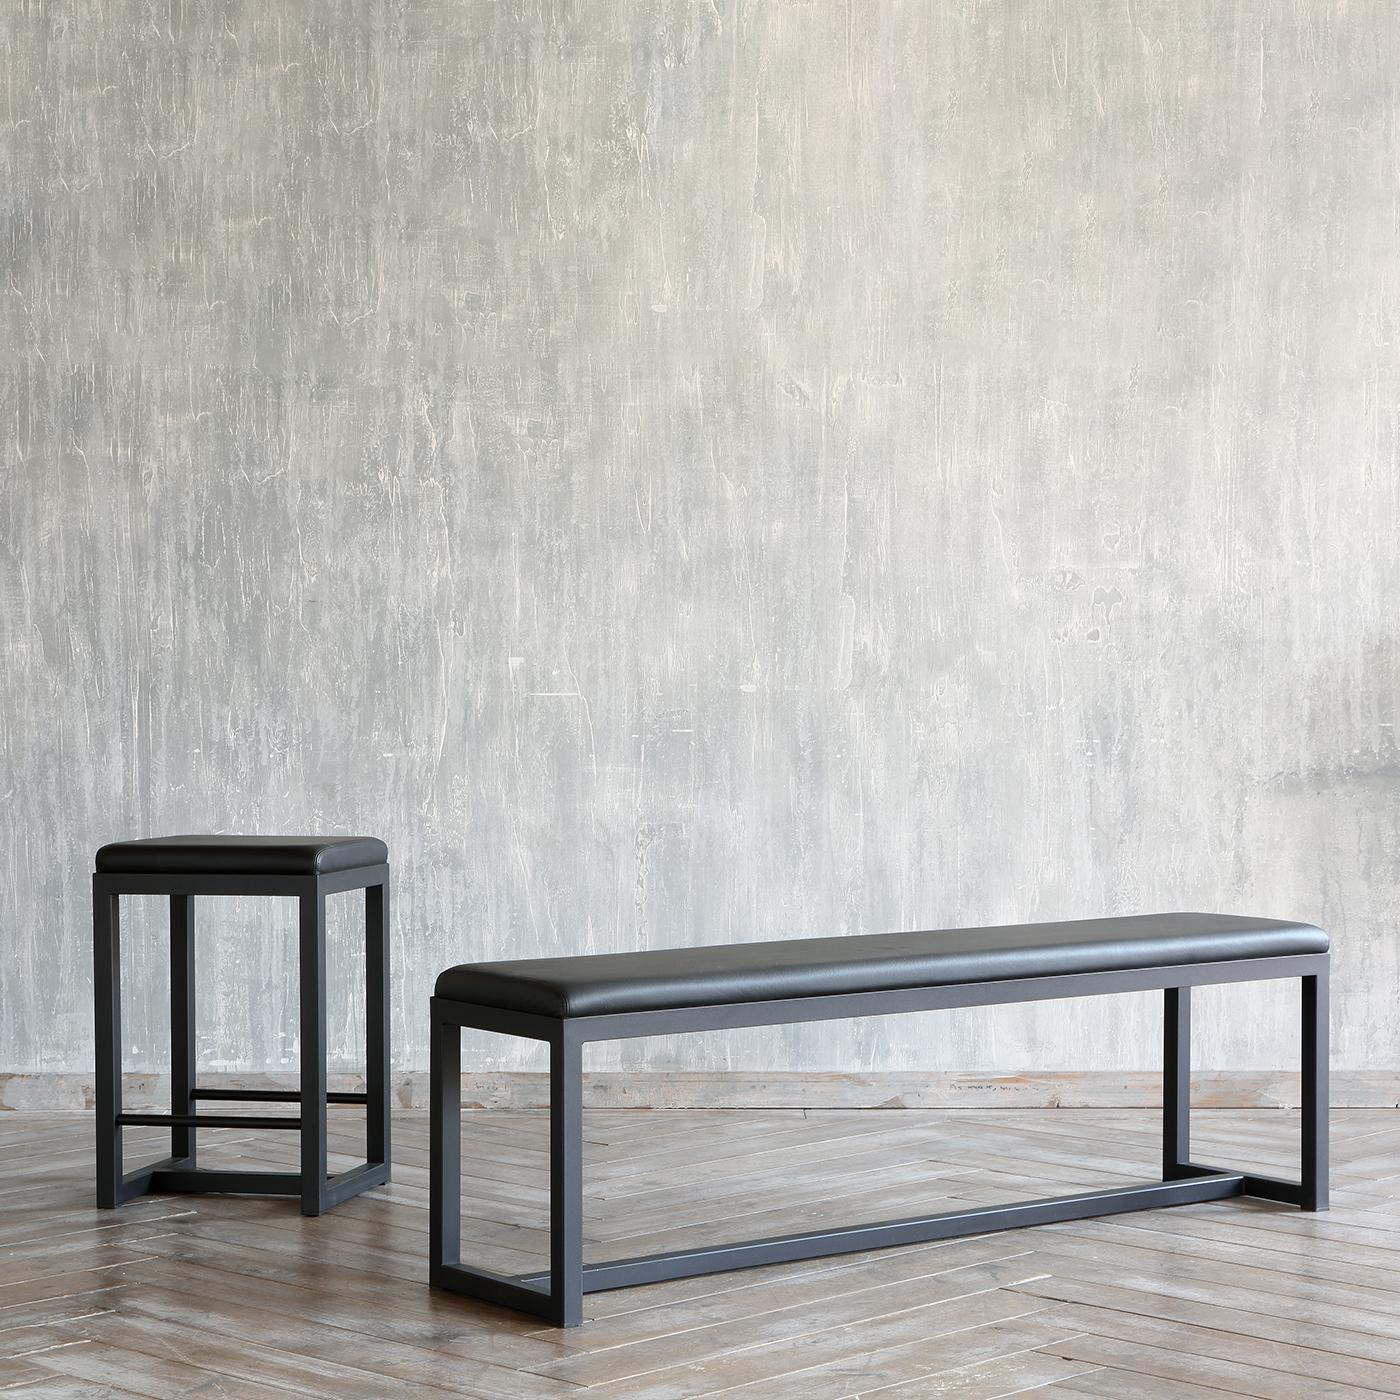 Contemporary Big Brother Large Black Bench by Maurizio Peregalli For Sale